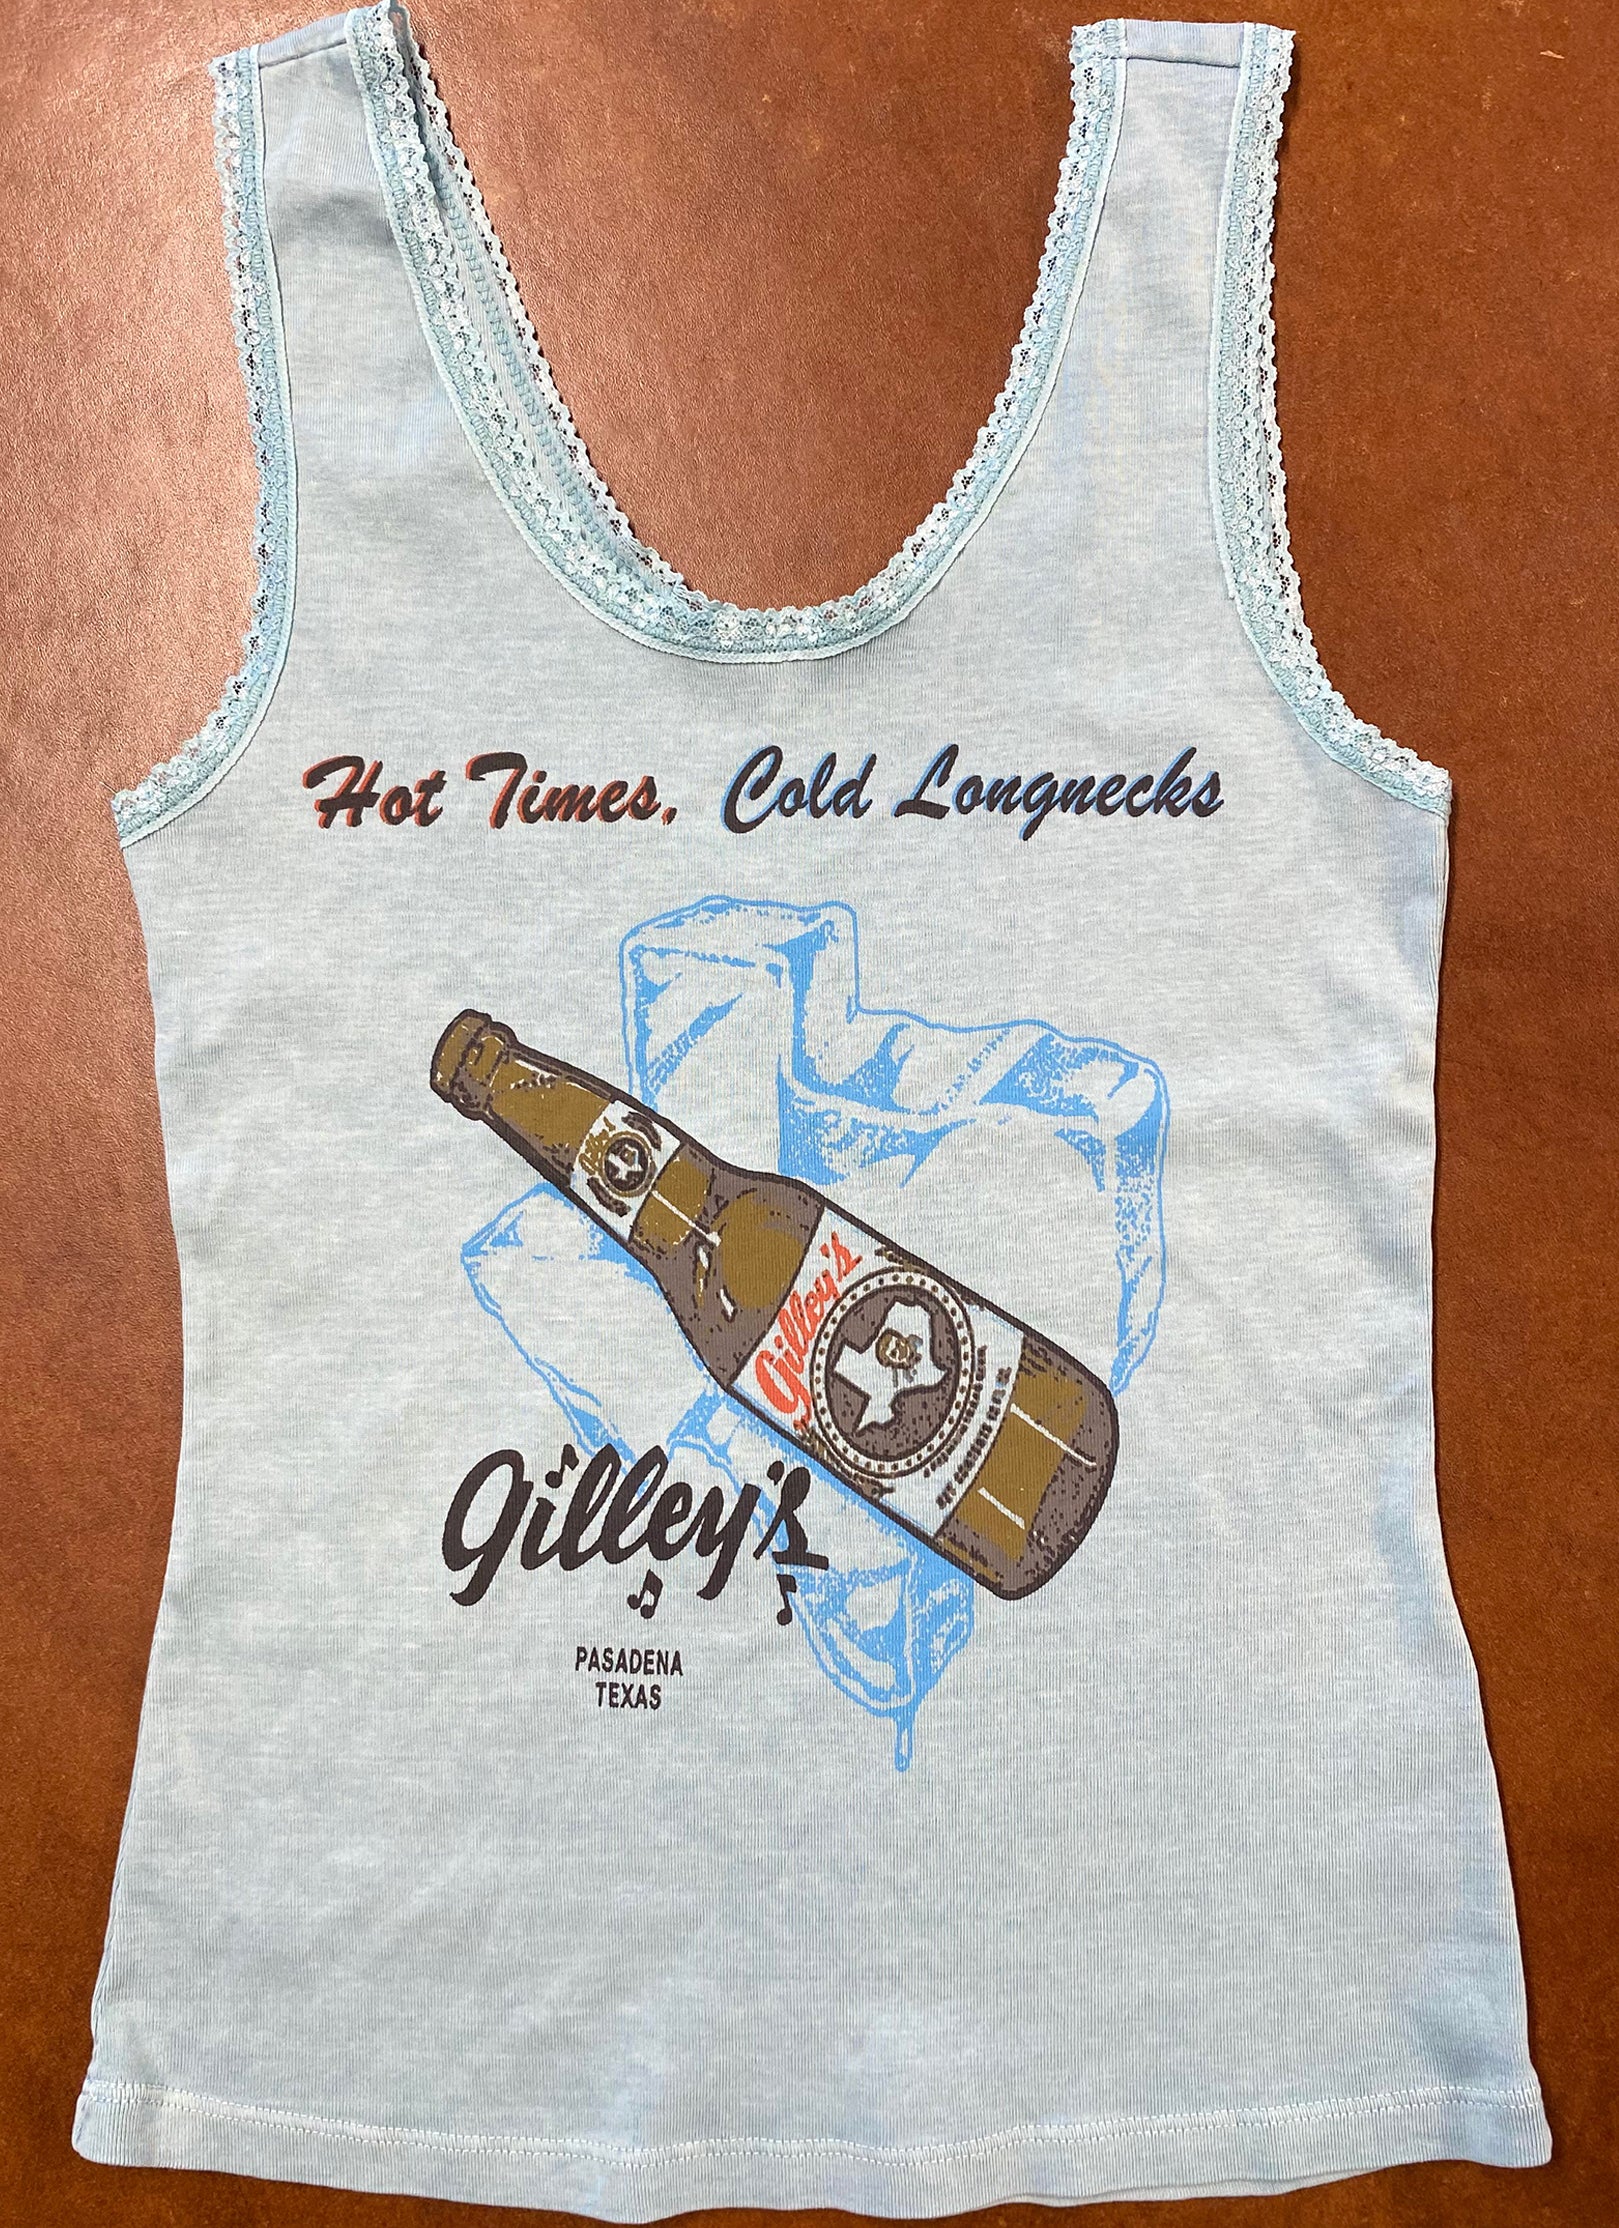 Gilley's Hot Times Vintage Blue Lace Tank